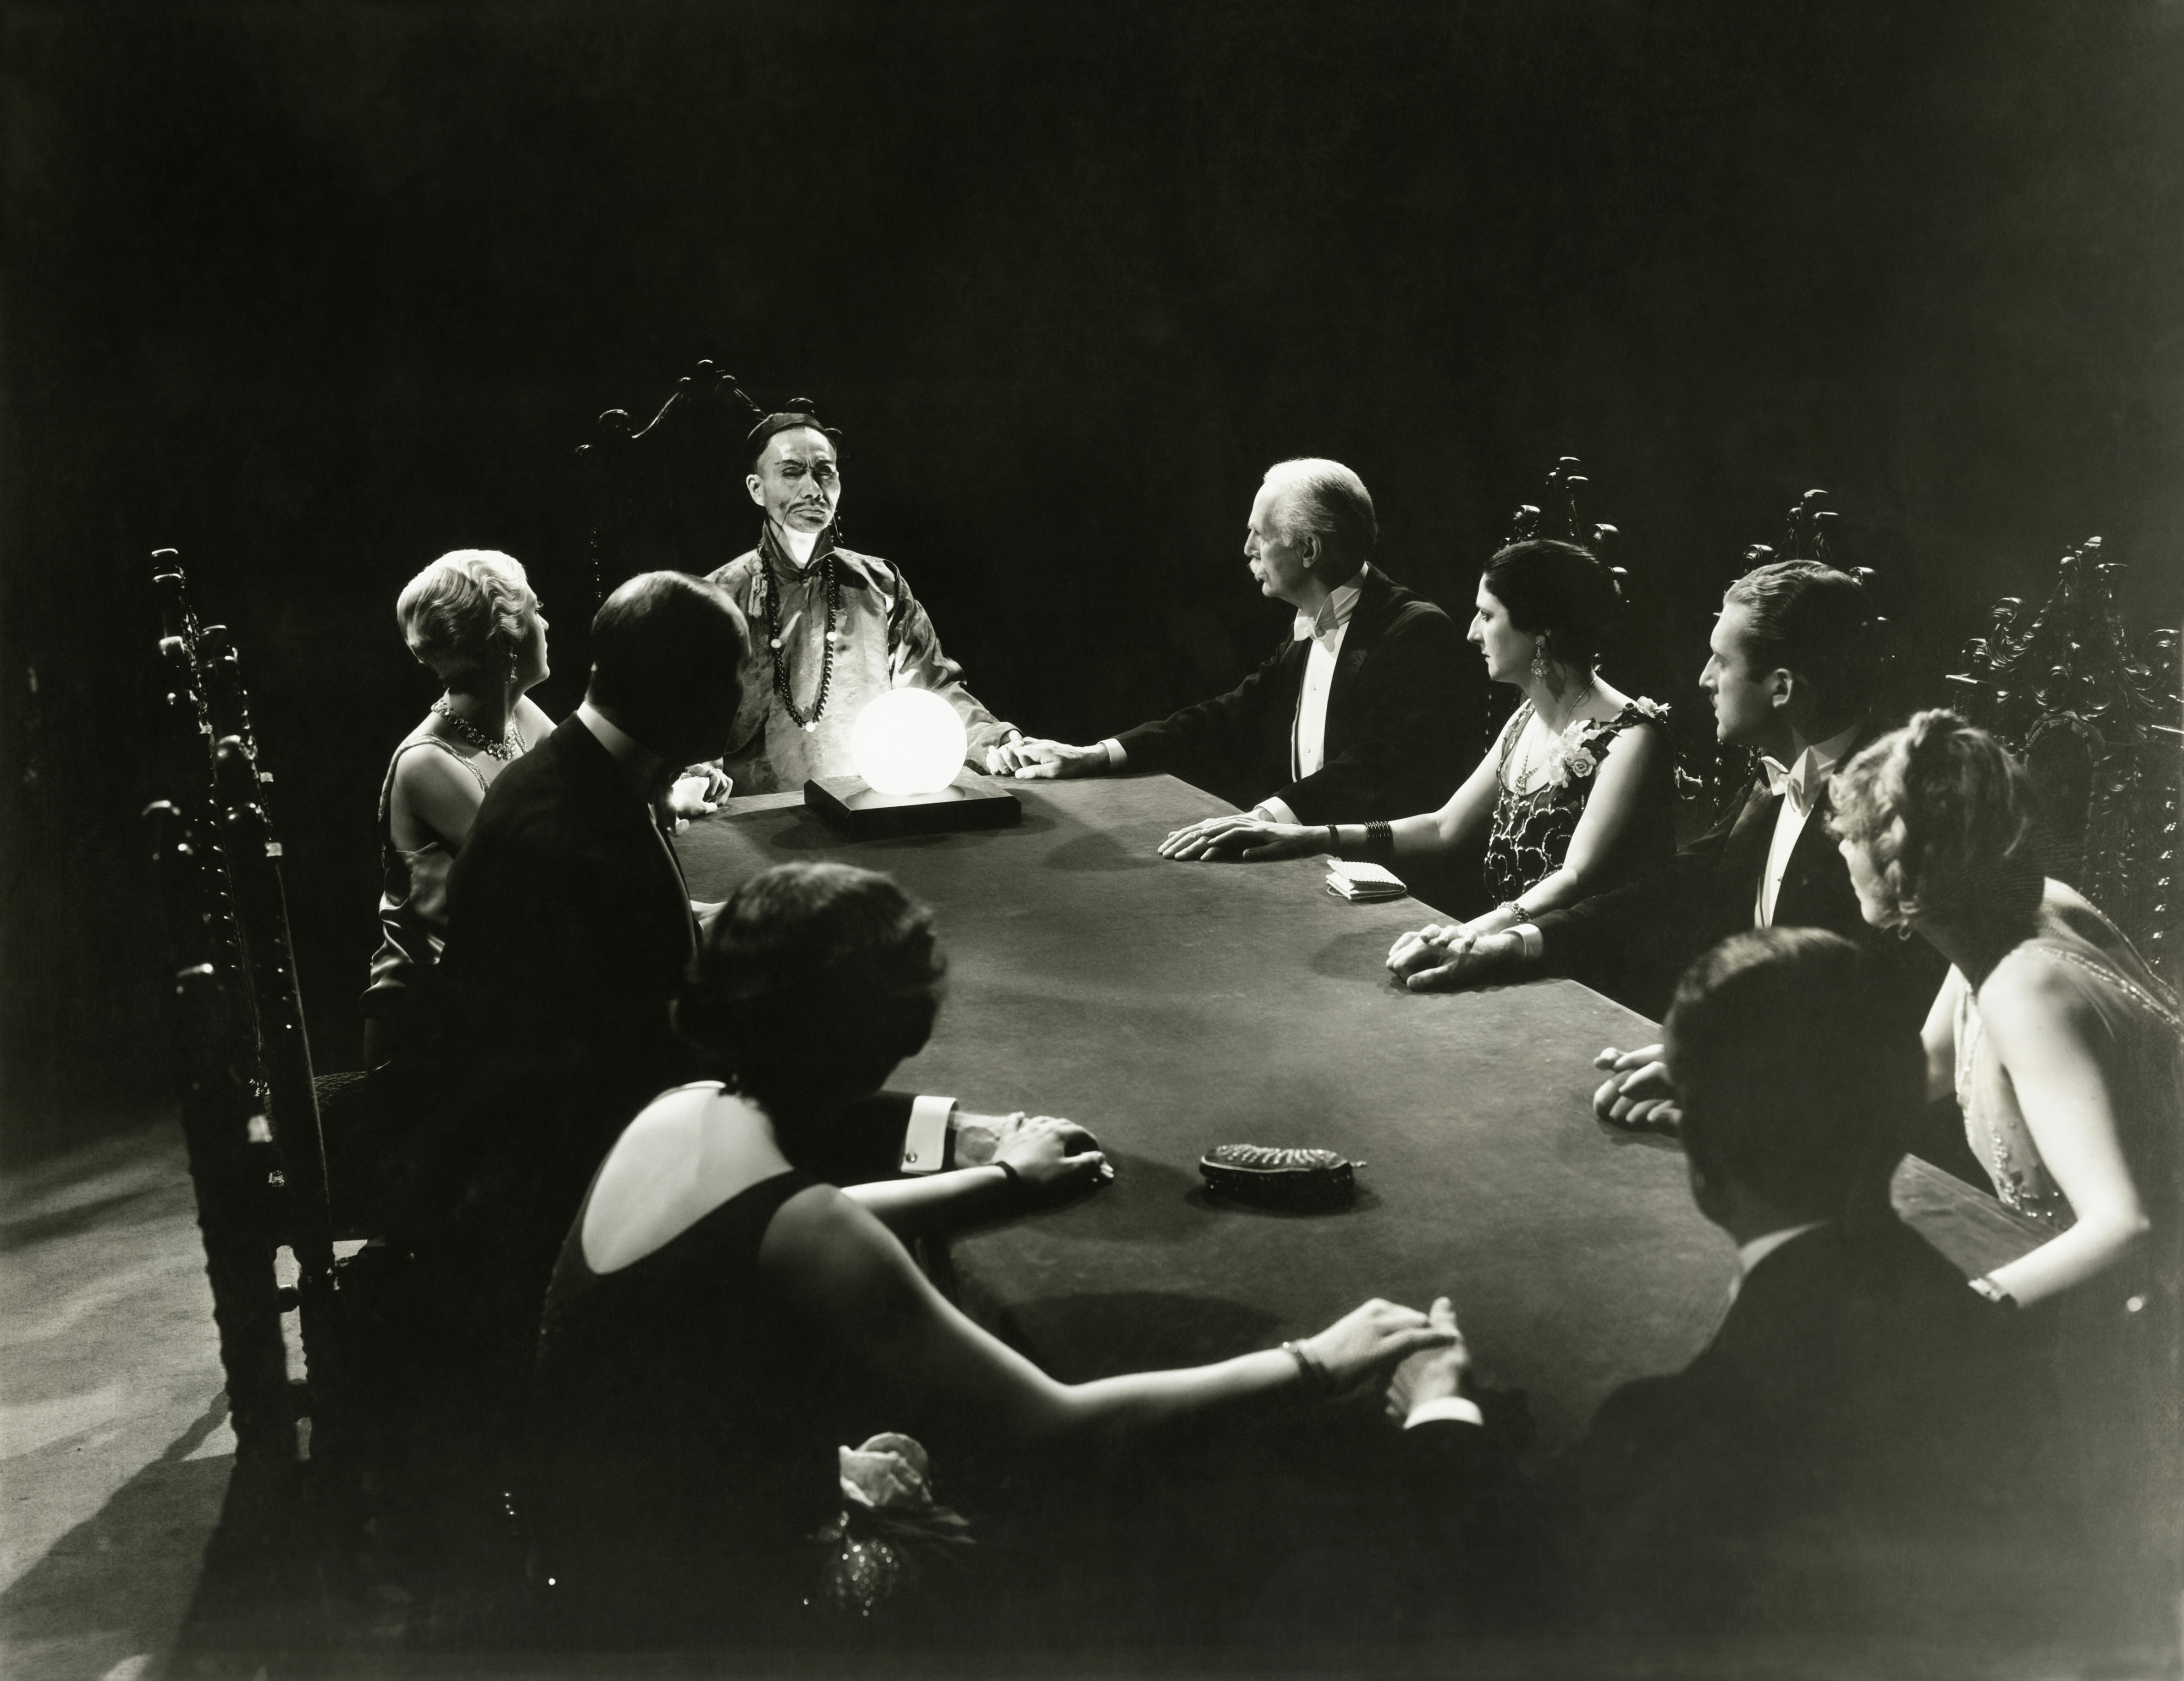 A black and white photograph of a group of people performing a seance.